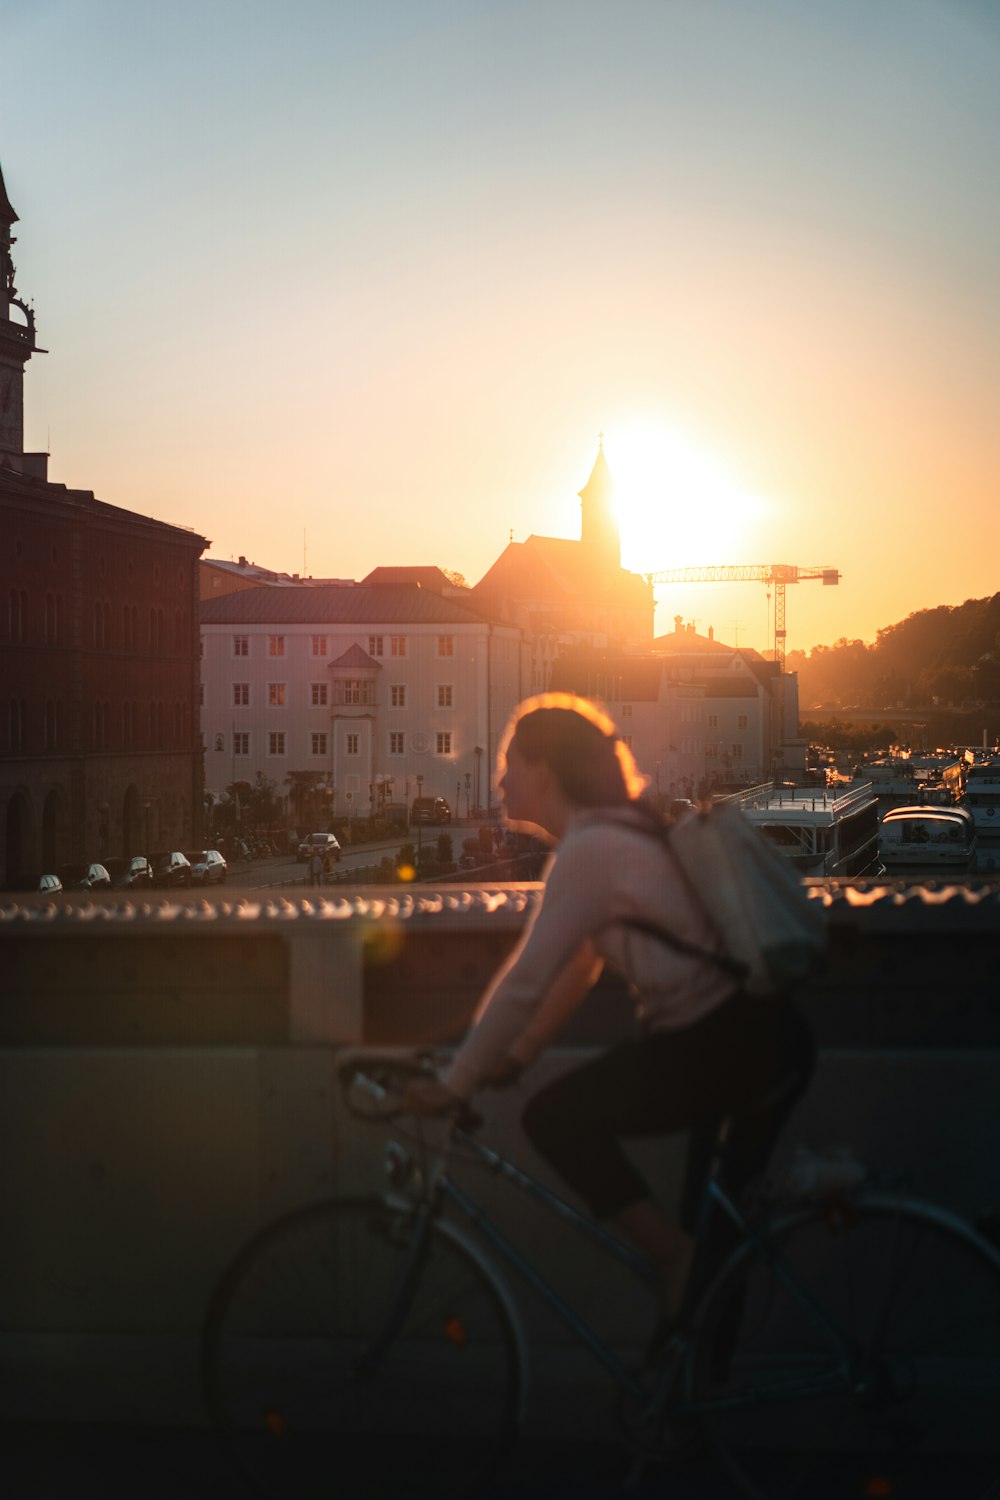 woman in white tank top riding on bicycle during sunset